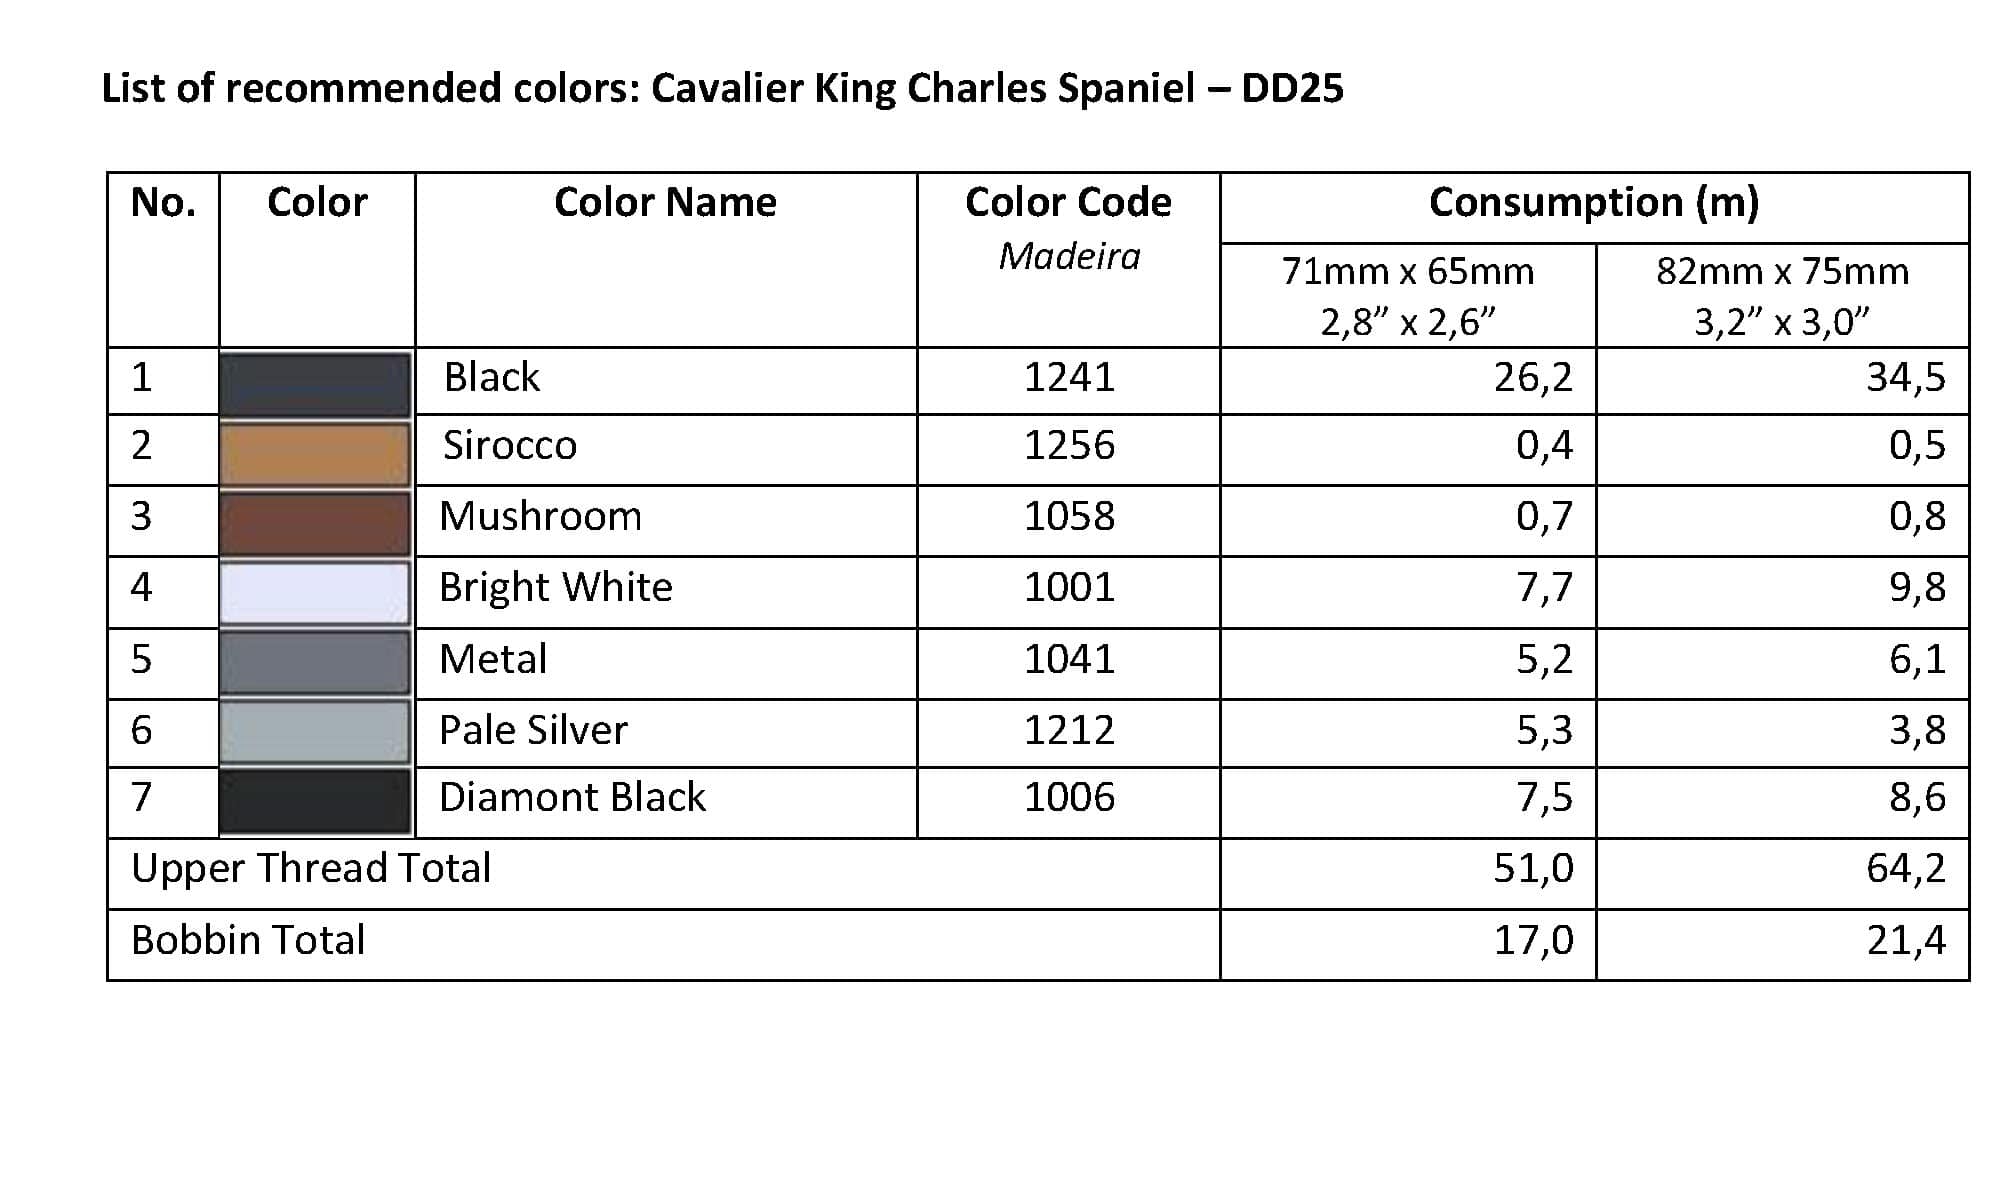 List of Recommended Colors - Cavalier King Charles Spaniel DD2